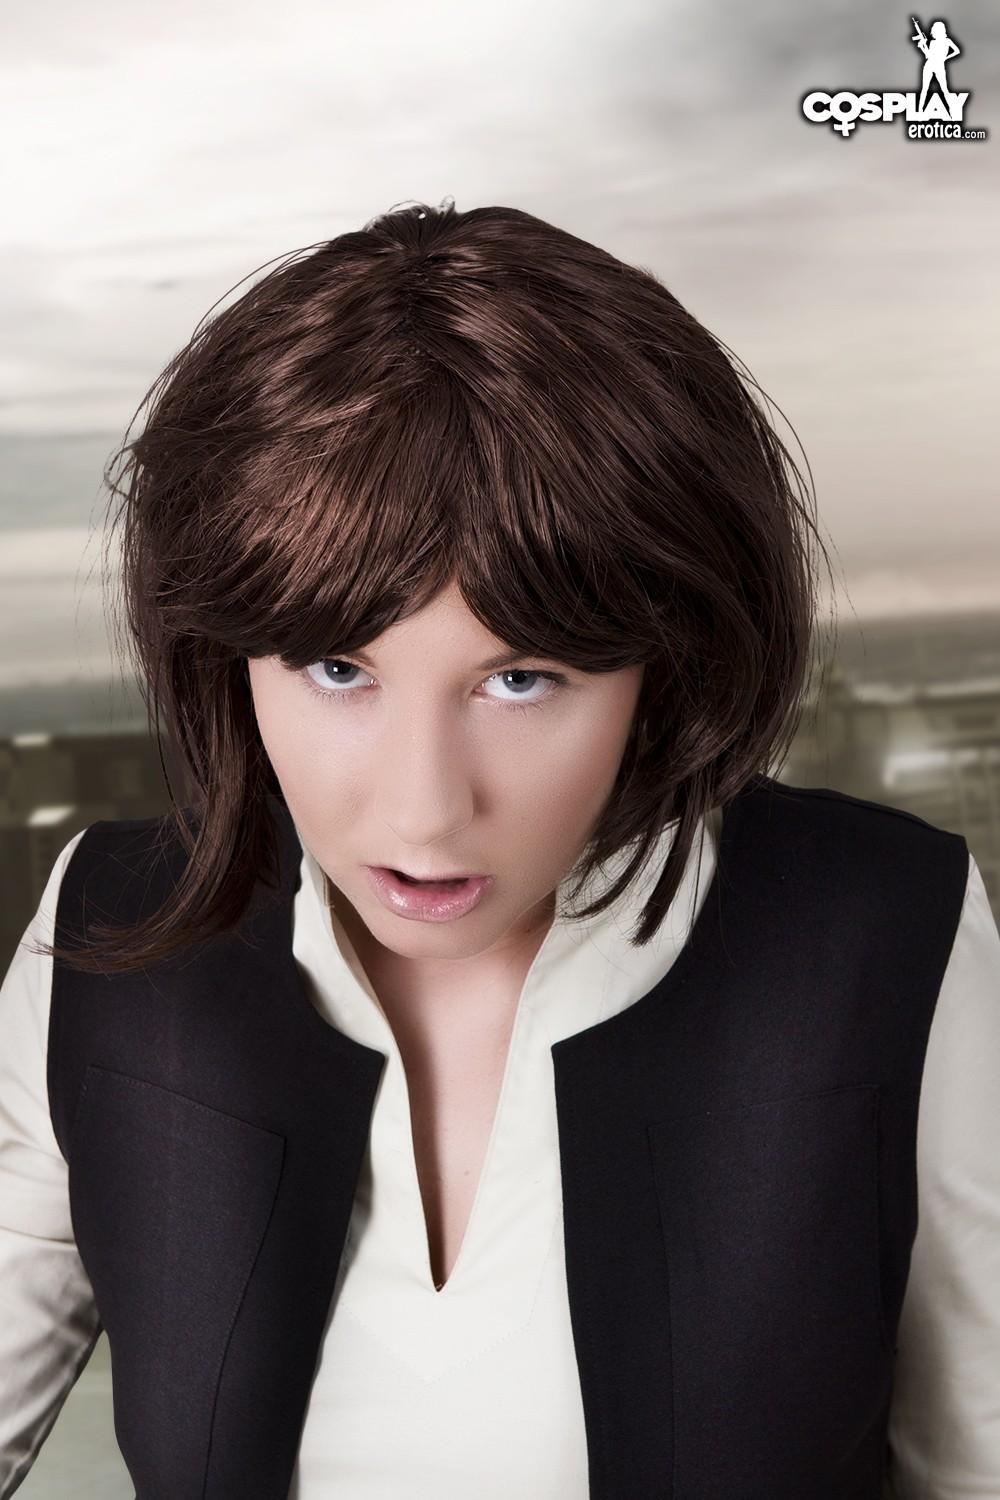 Cosplay girl Betsie dresses as the sexiest Han Solo I've ever seen #53438351